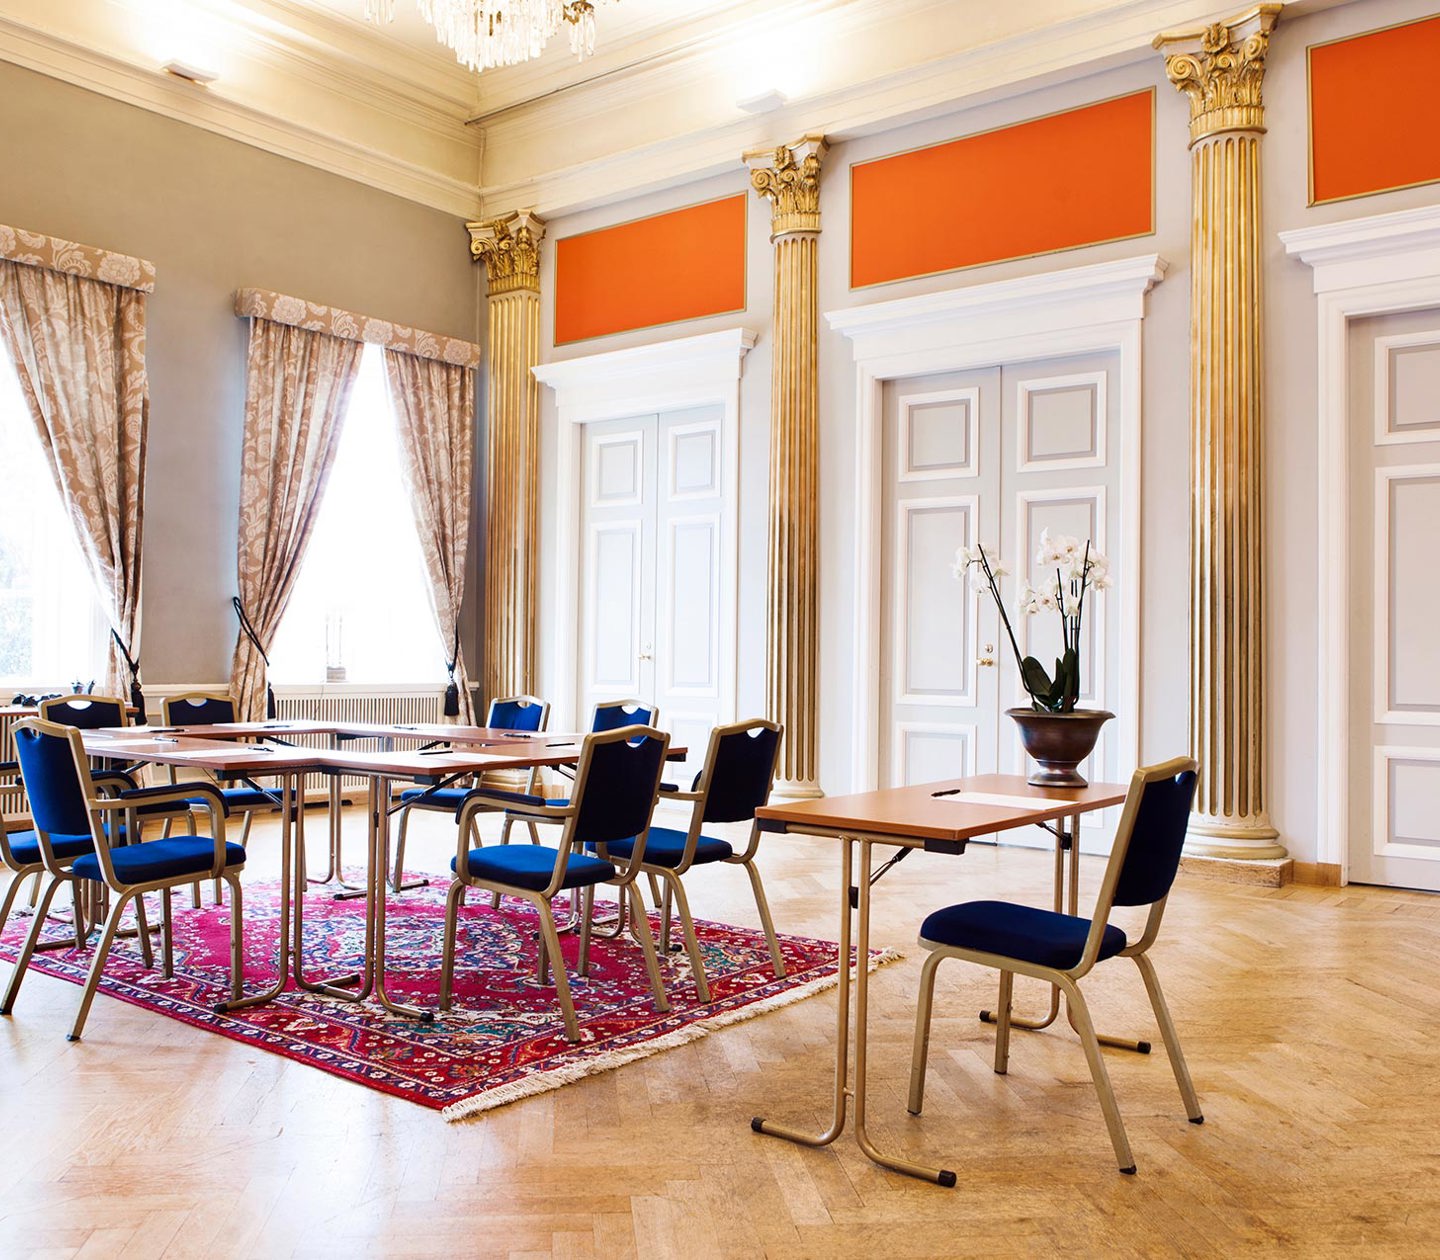 Conference room with tables and chairs